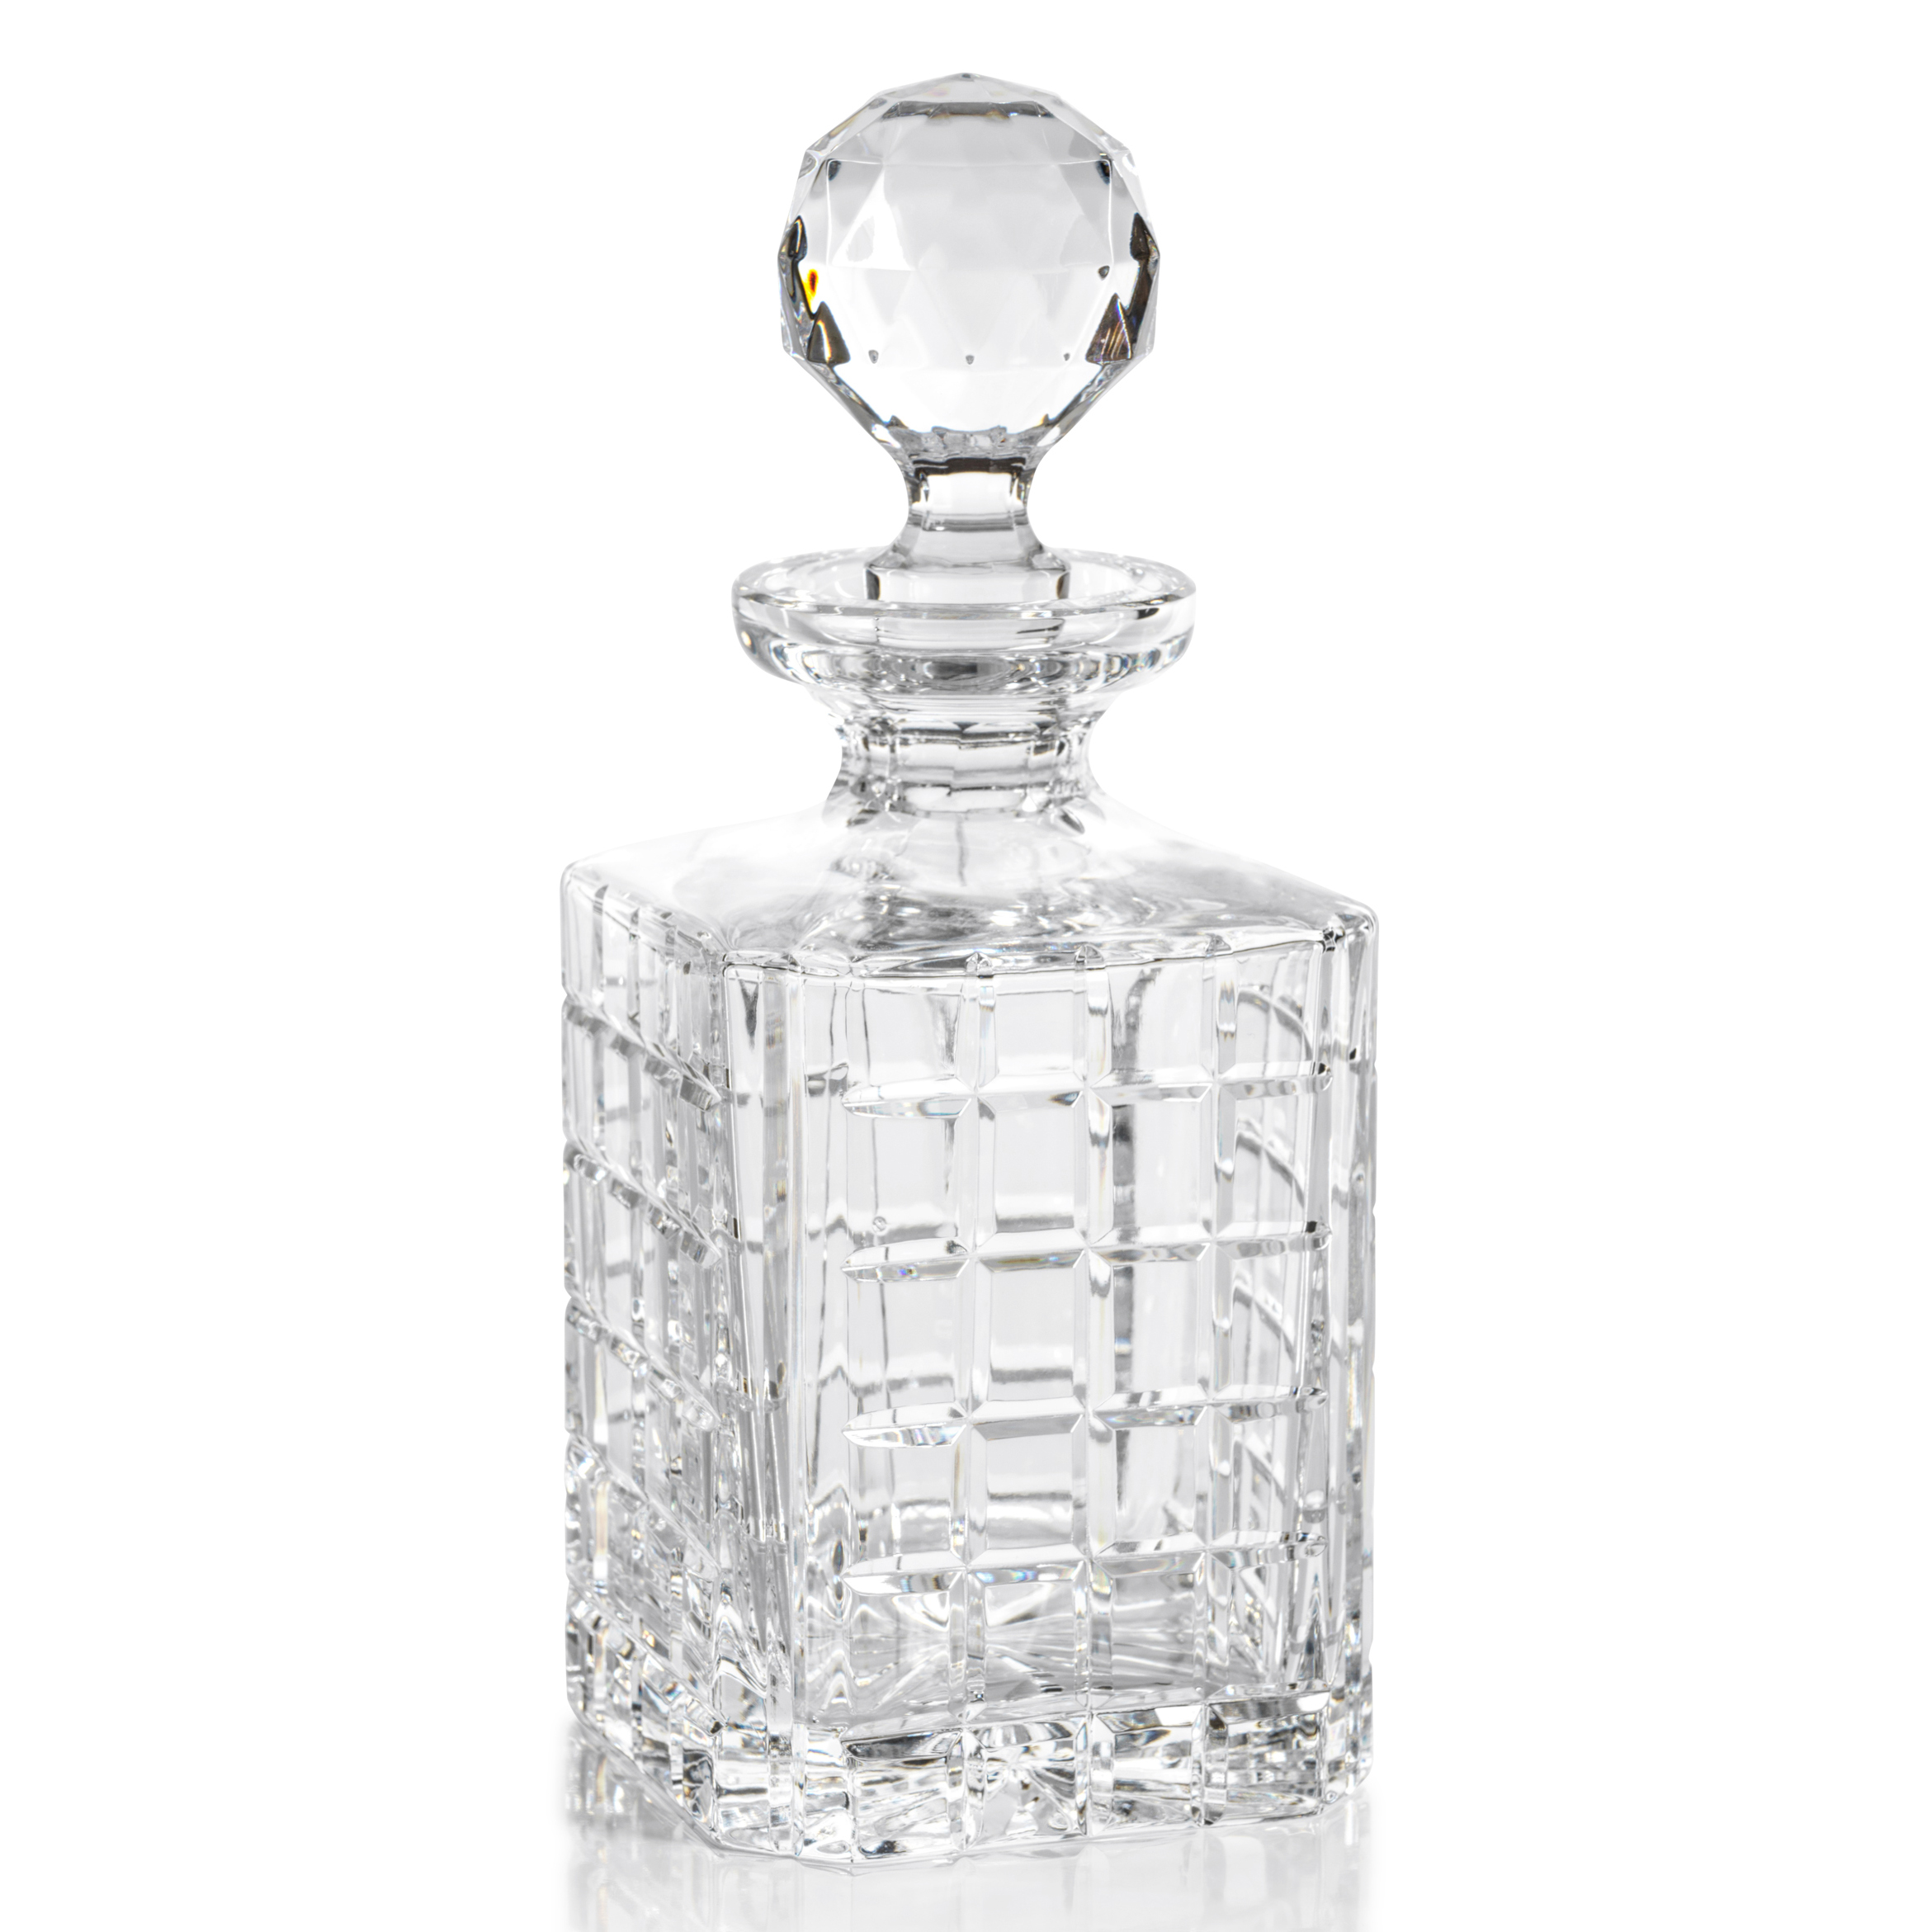 Ezekiel Crystal Glass Whiskey & Brandy Decanter by Zodax - Seven Colonial